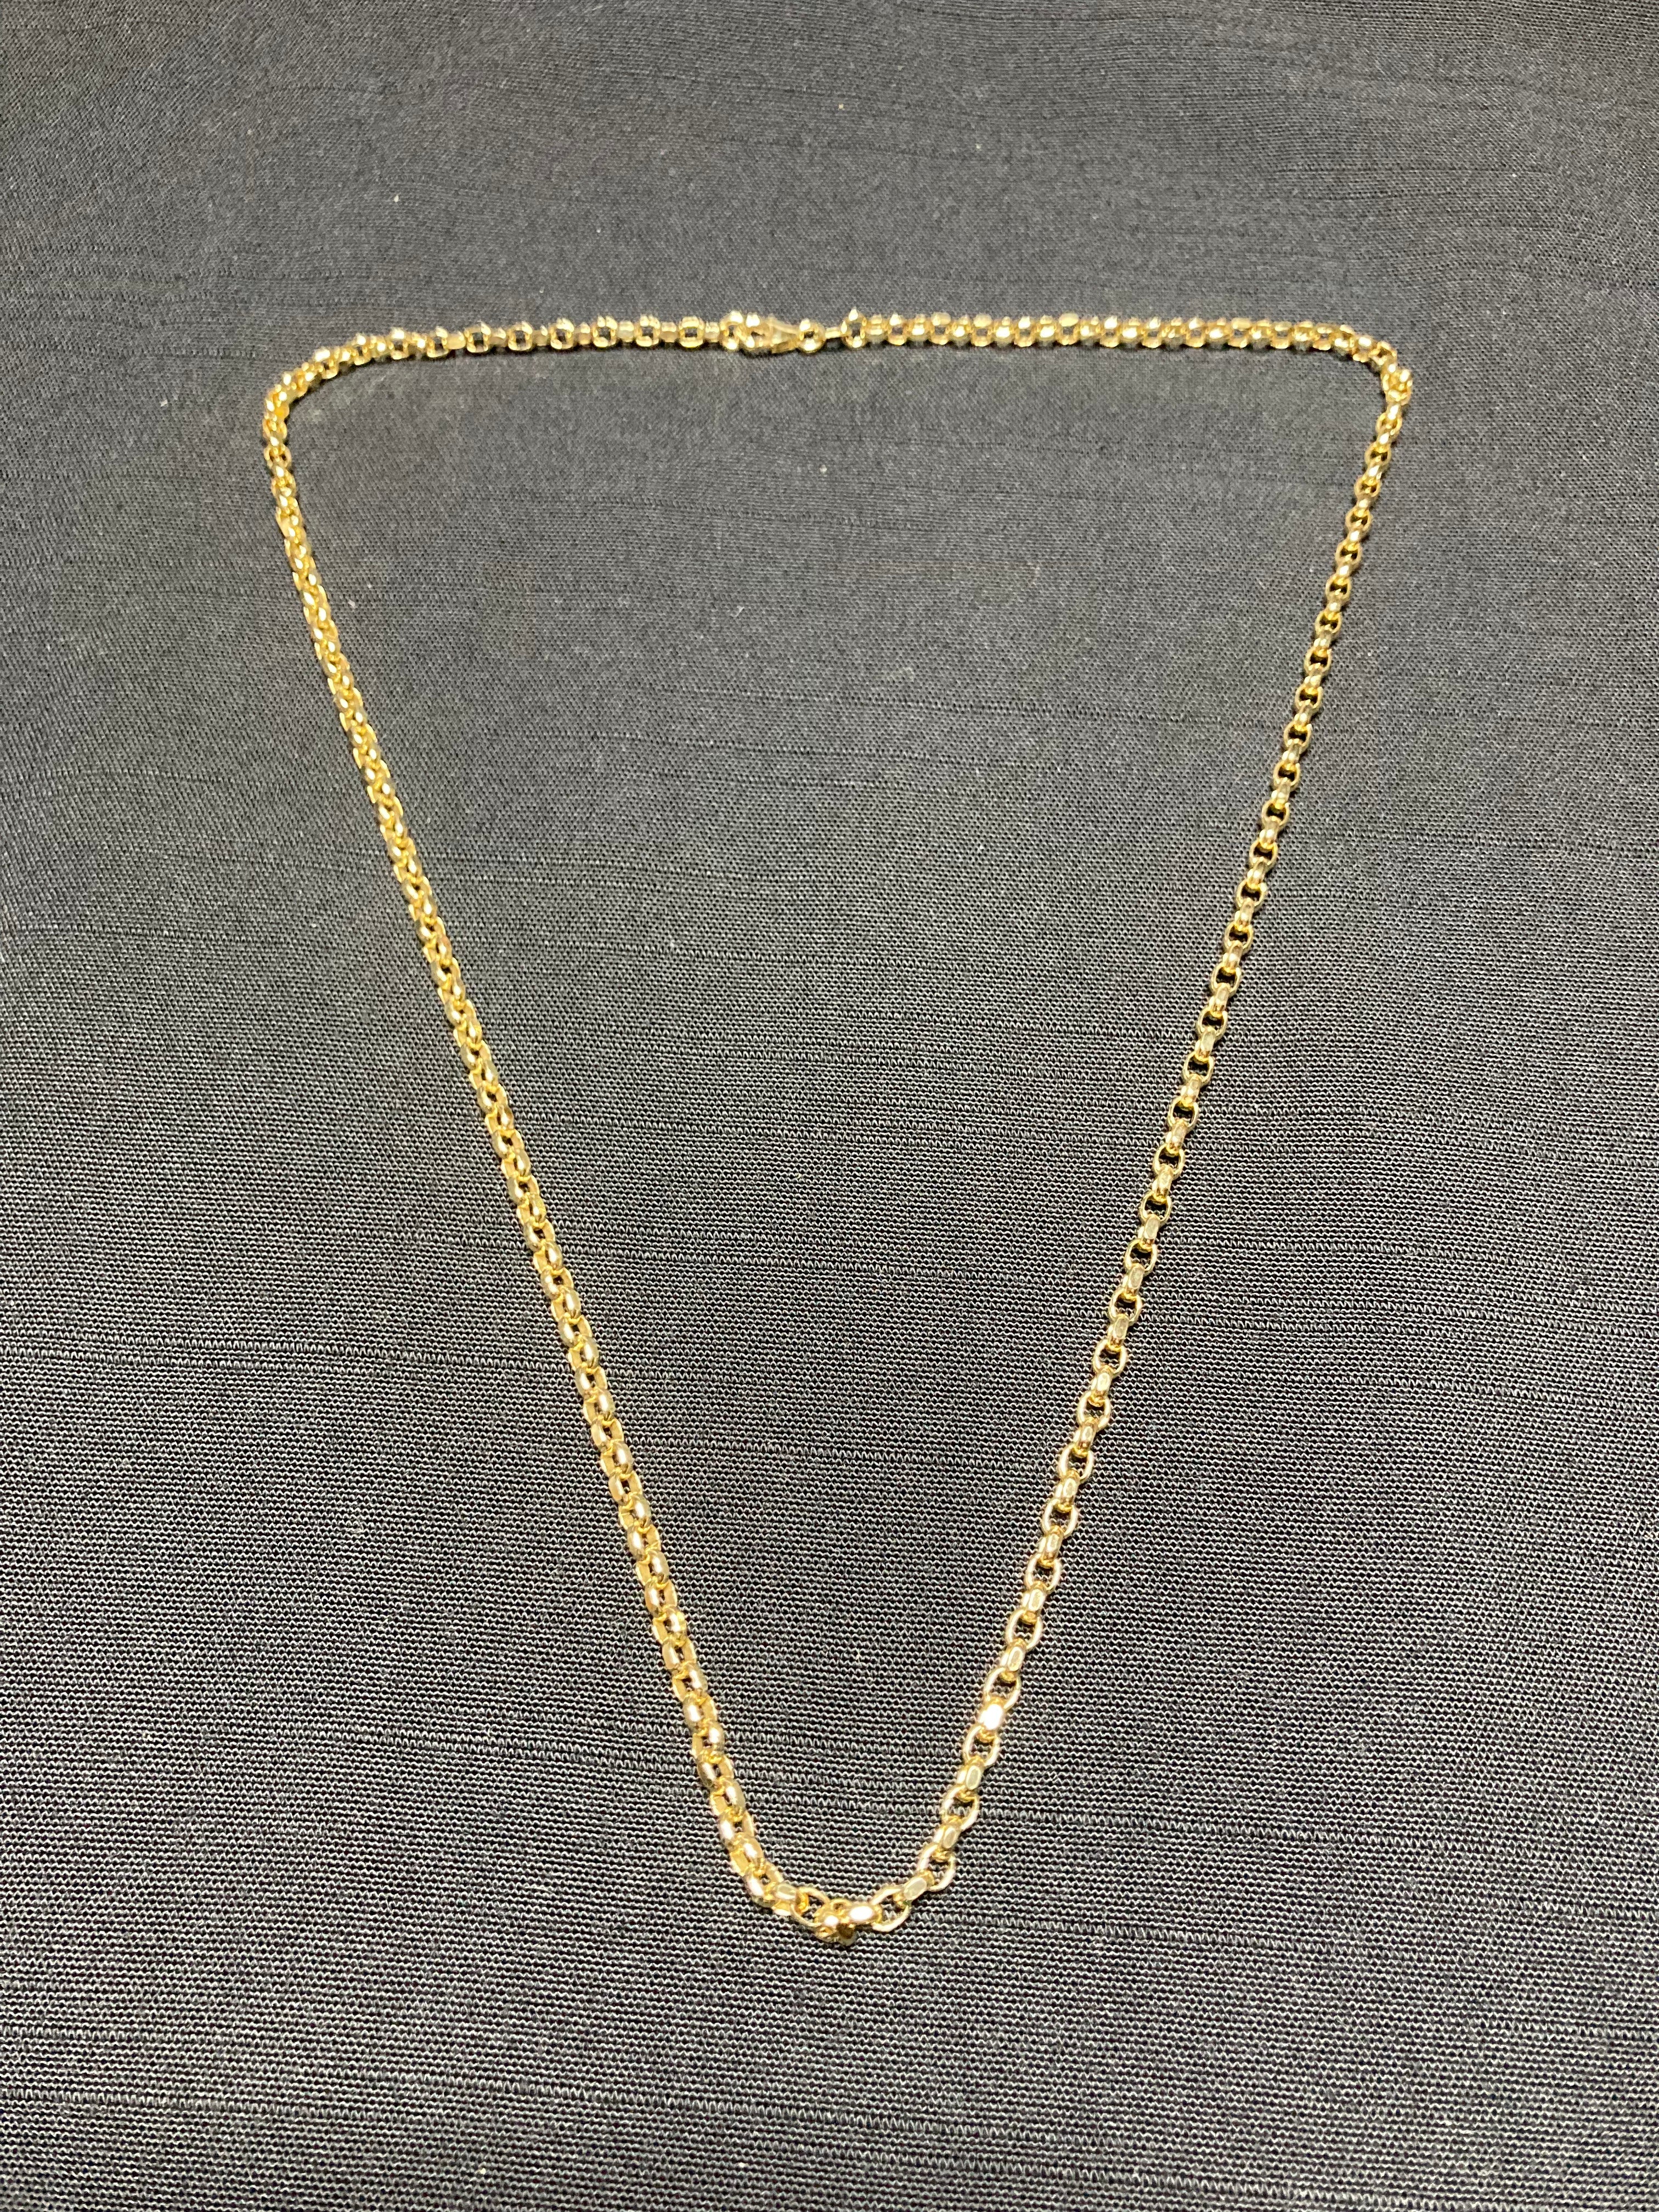 9ct Yellow gold Necklace. 20" diamond cut belcher link with trigger clasp